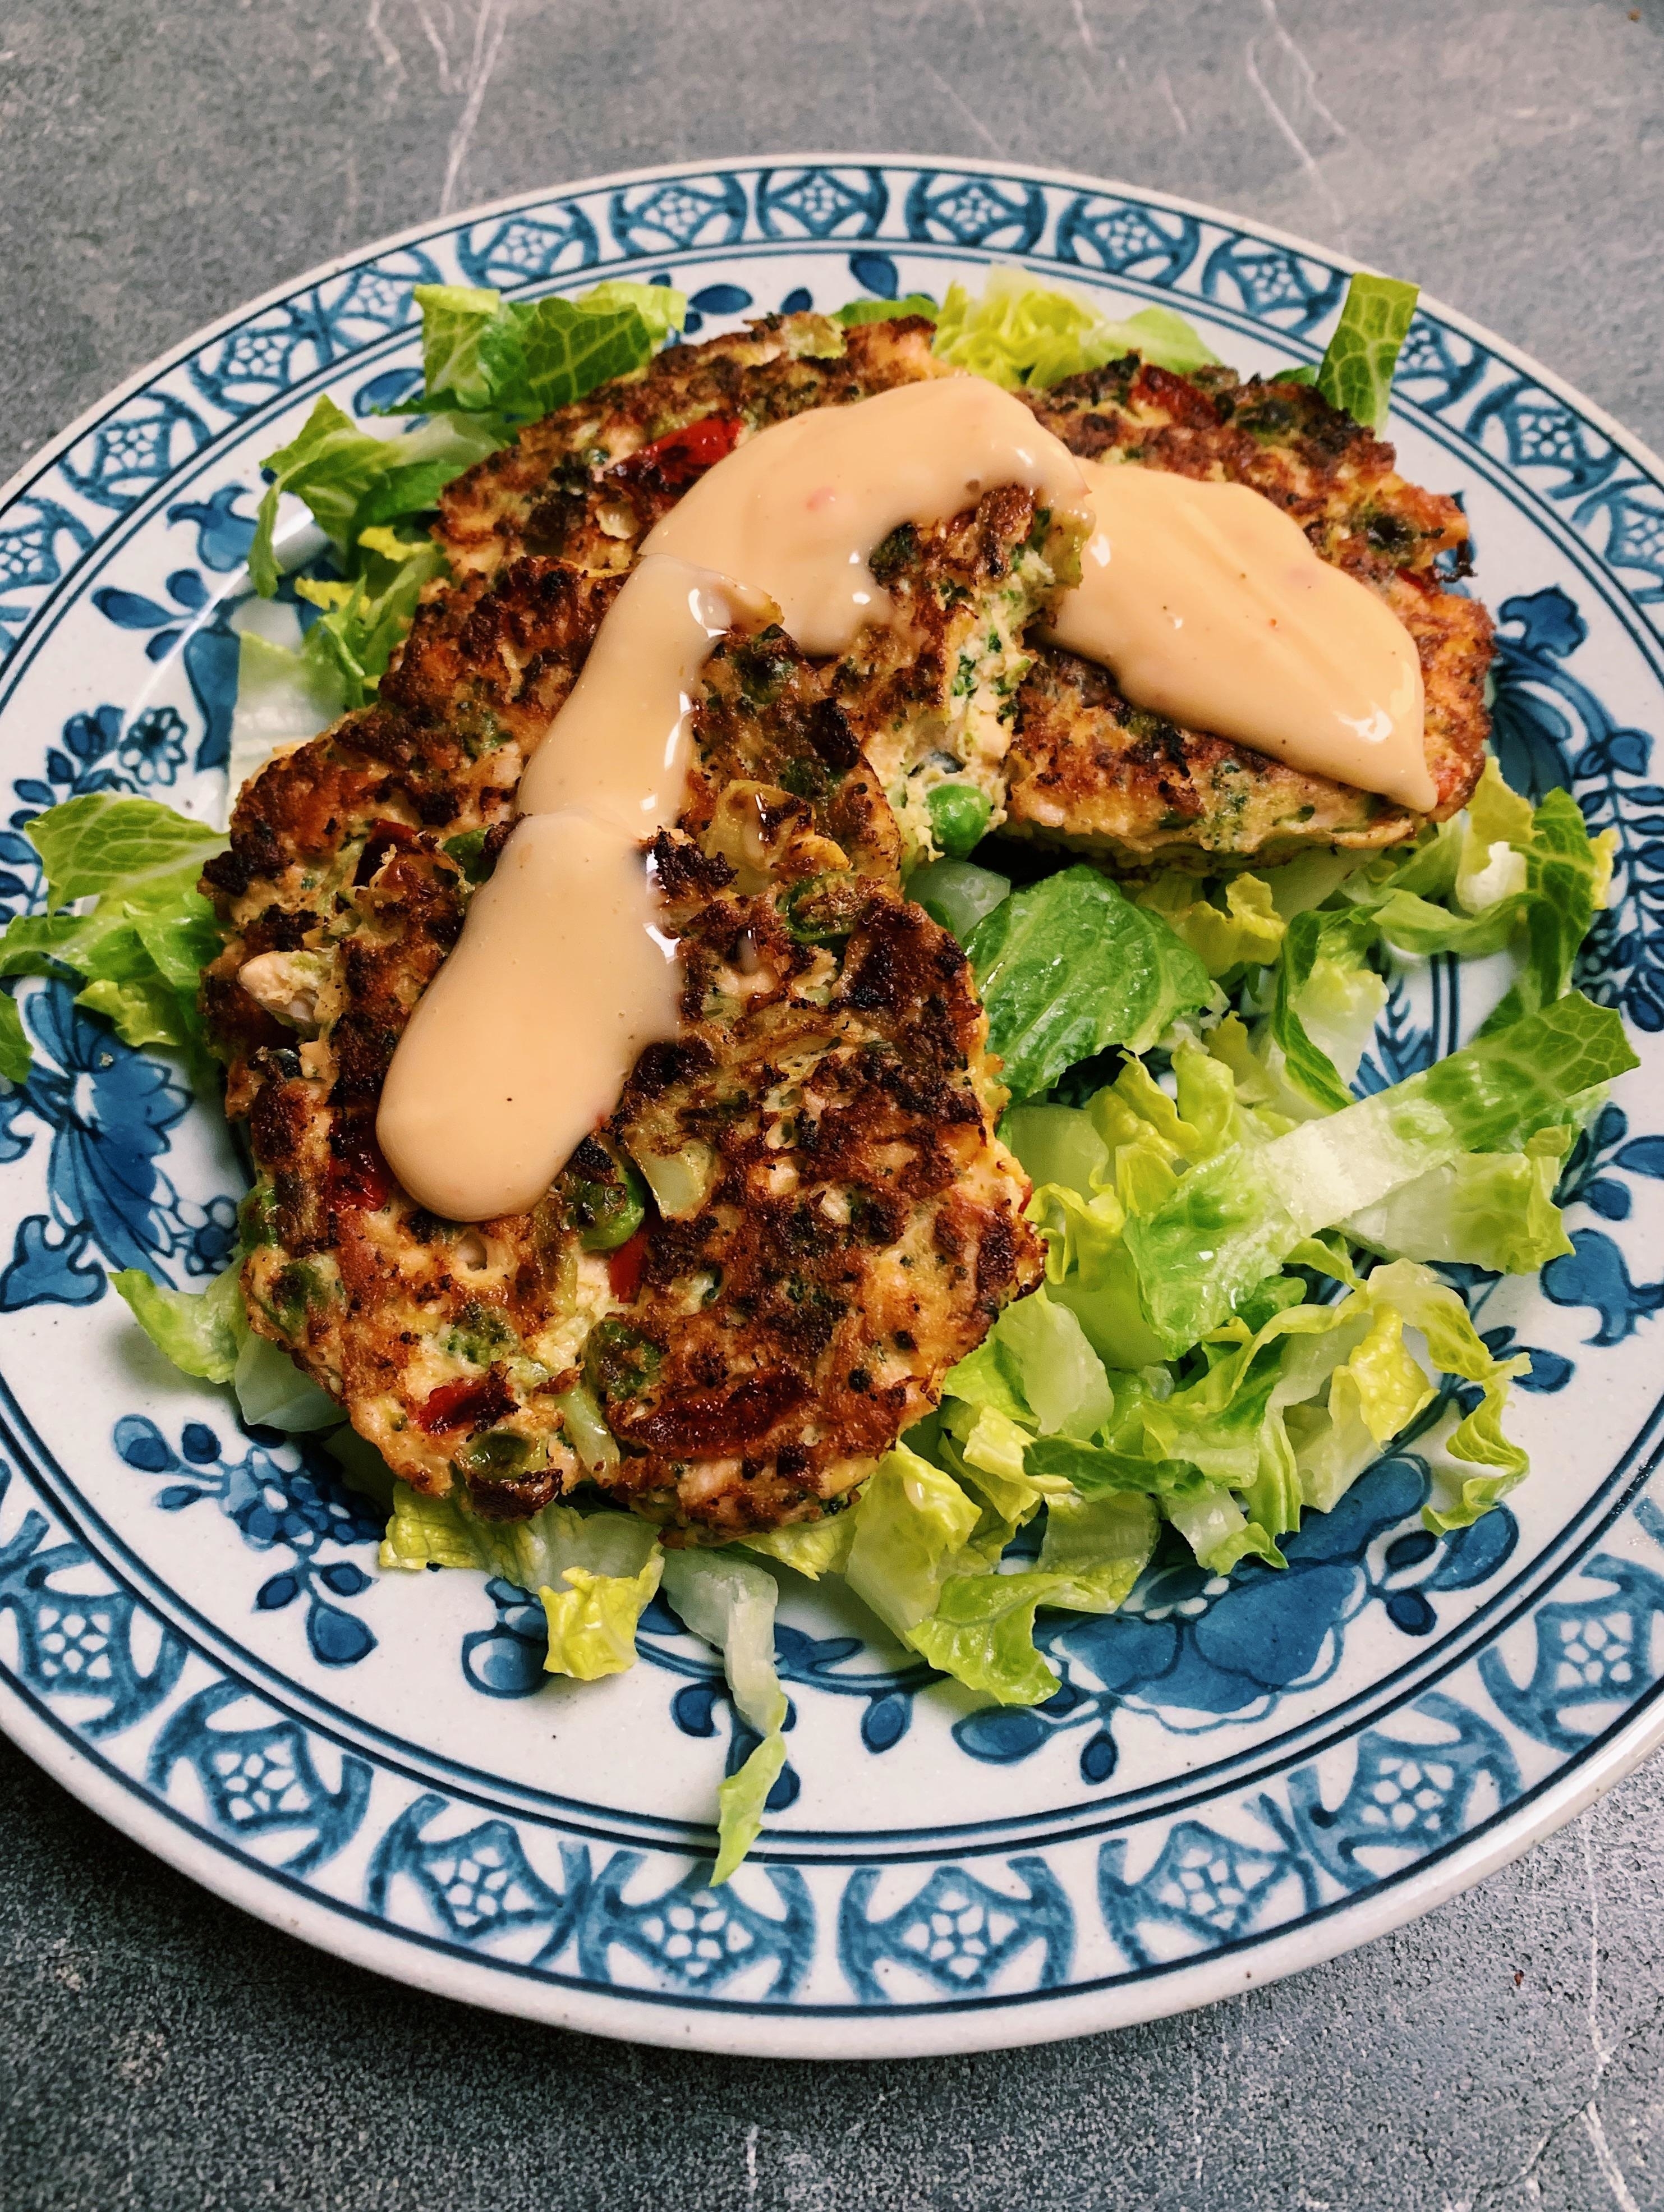 Two chicken patties over lettuce on a blue patterned plate, with drizzled sauce